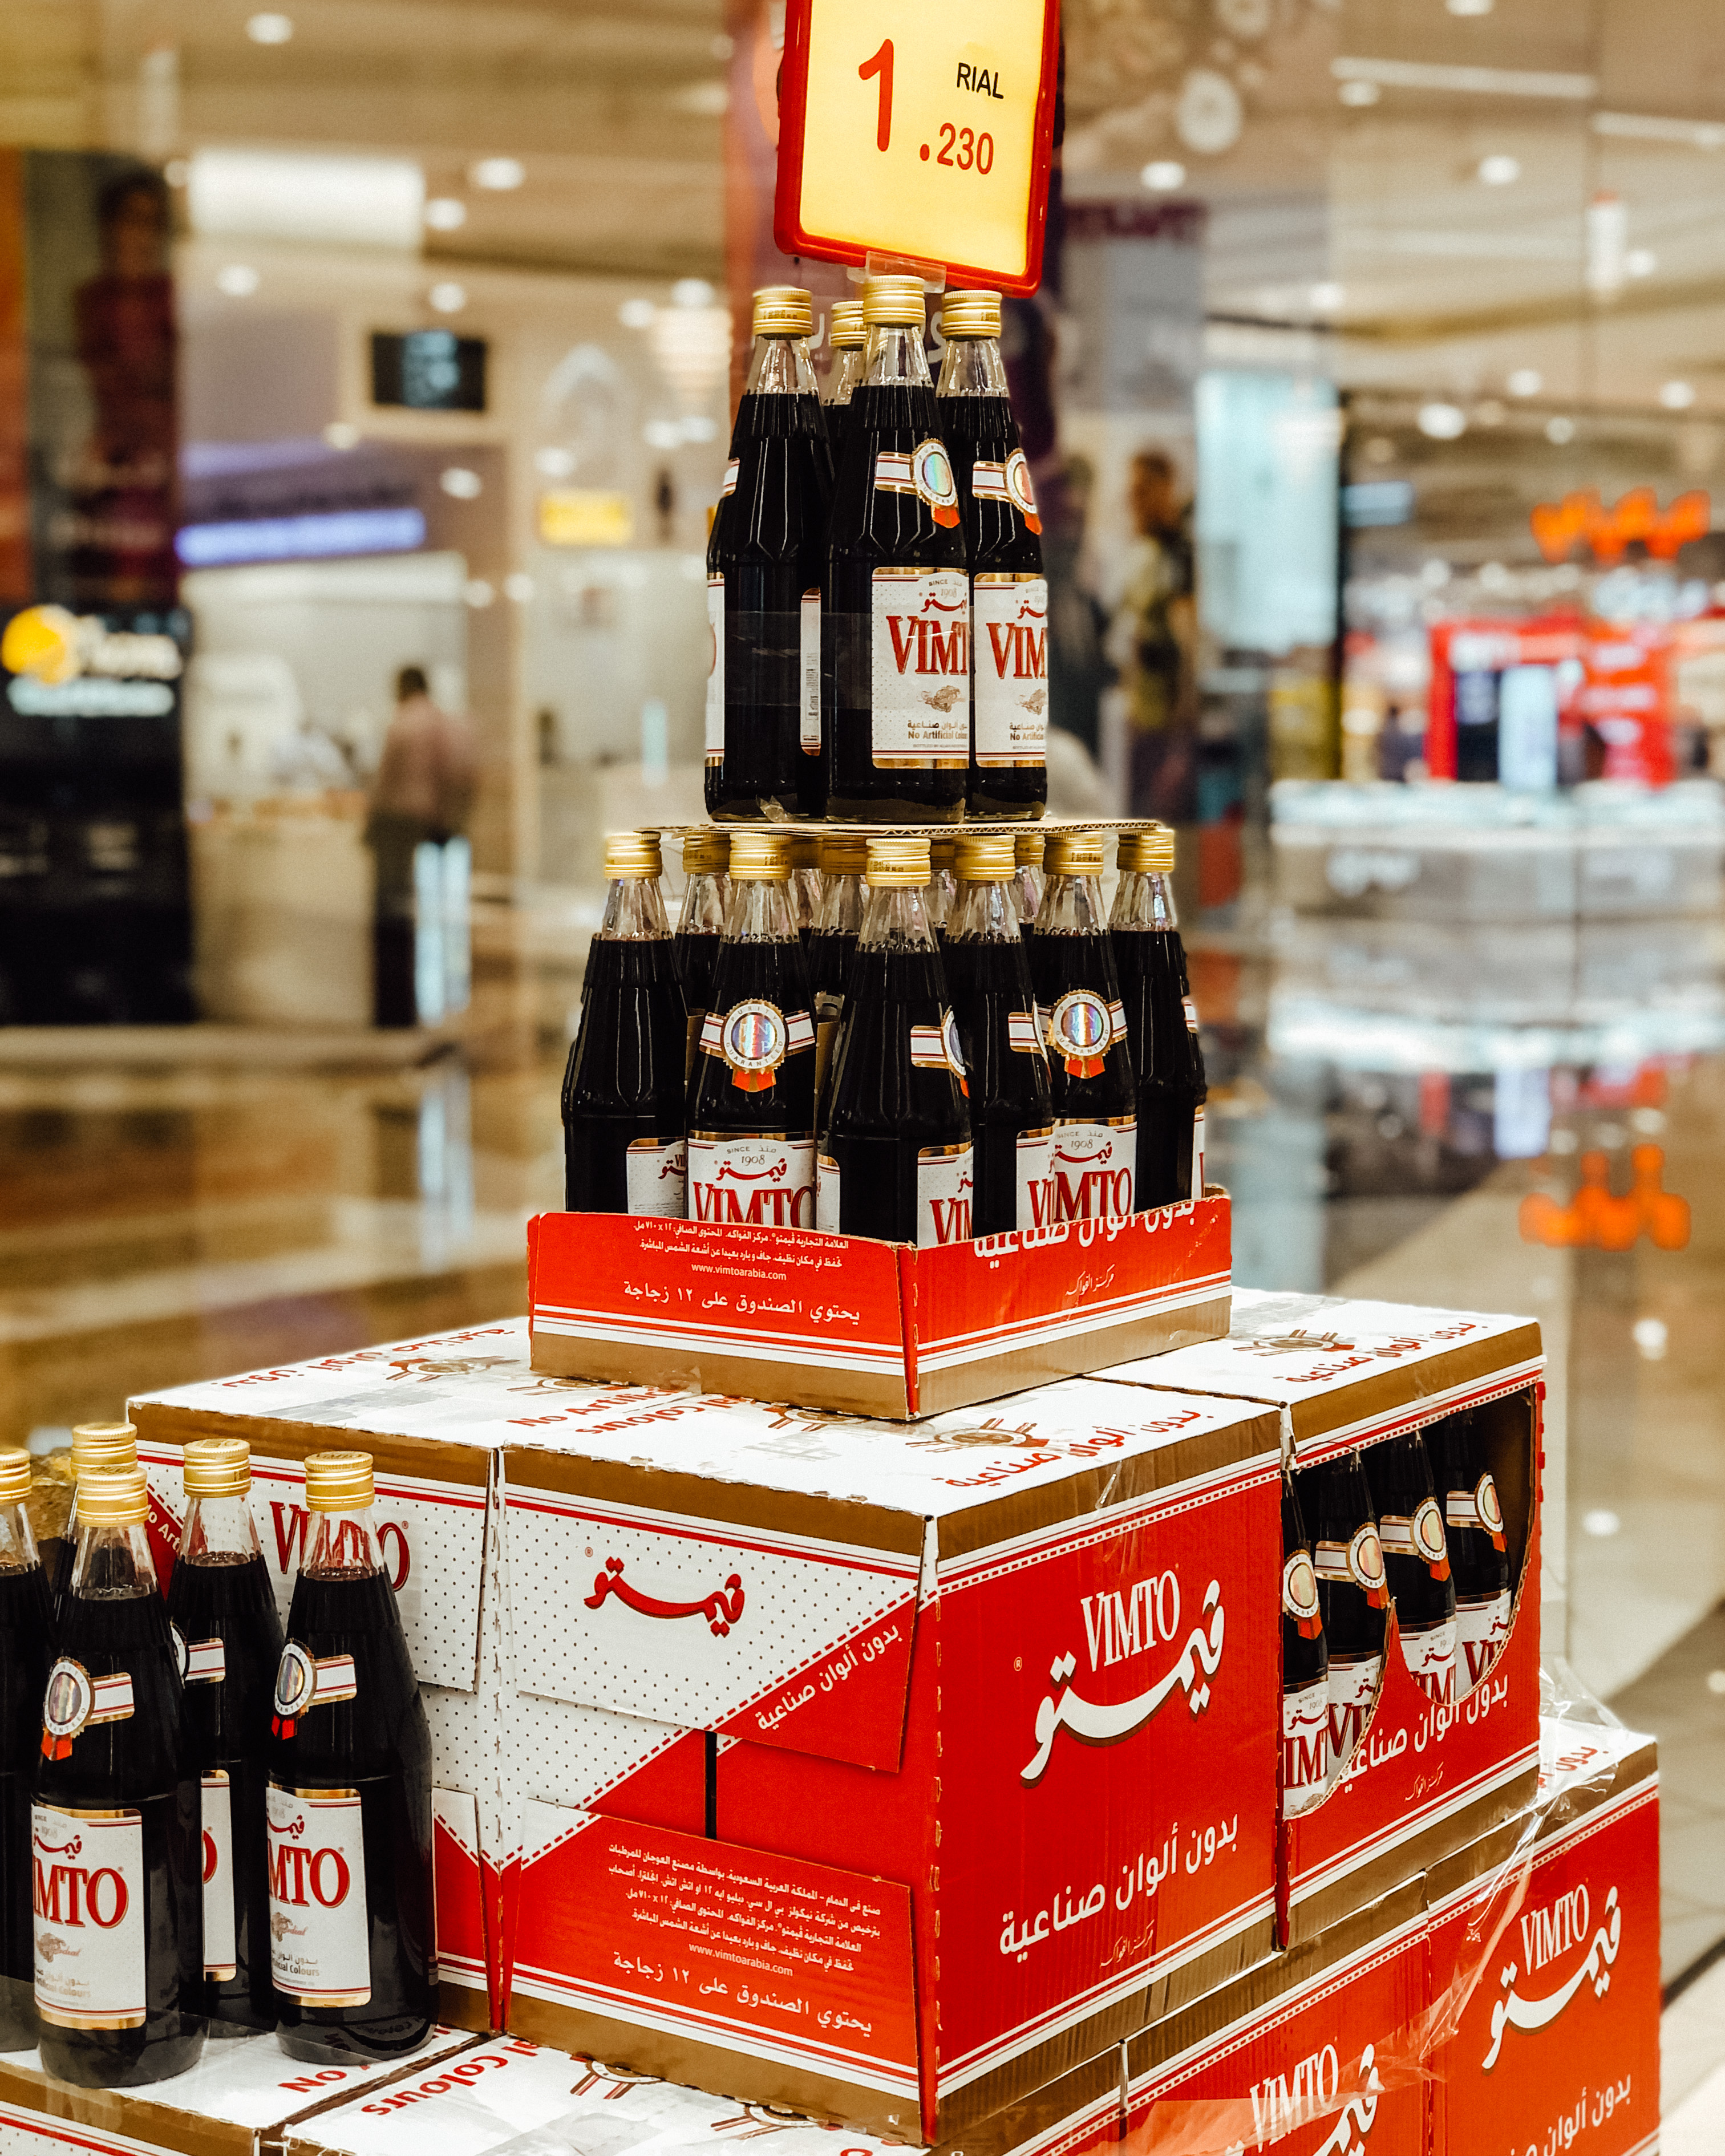 Signs of Ramadan in the Gulf - tower of Vimto in a local supermarket in Muscat